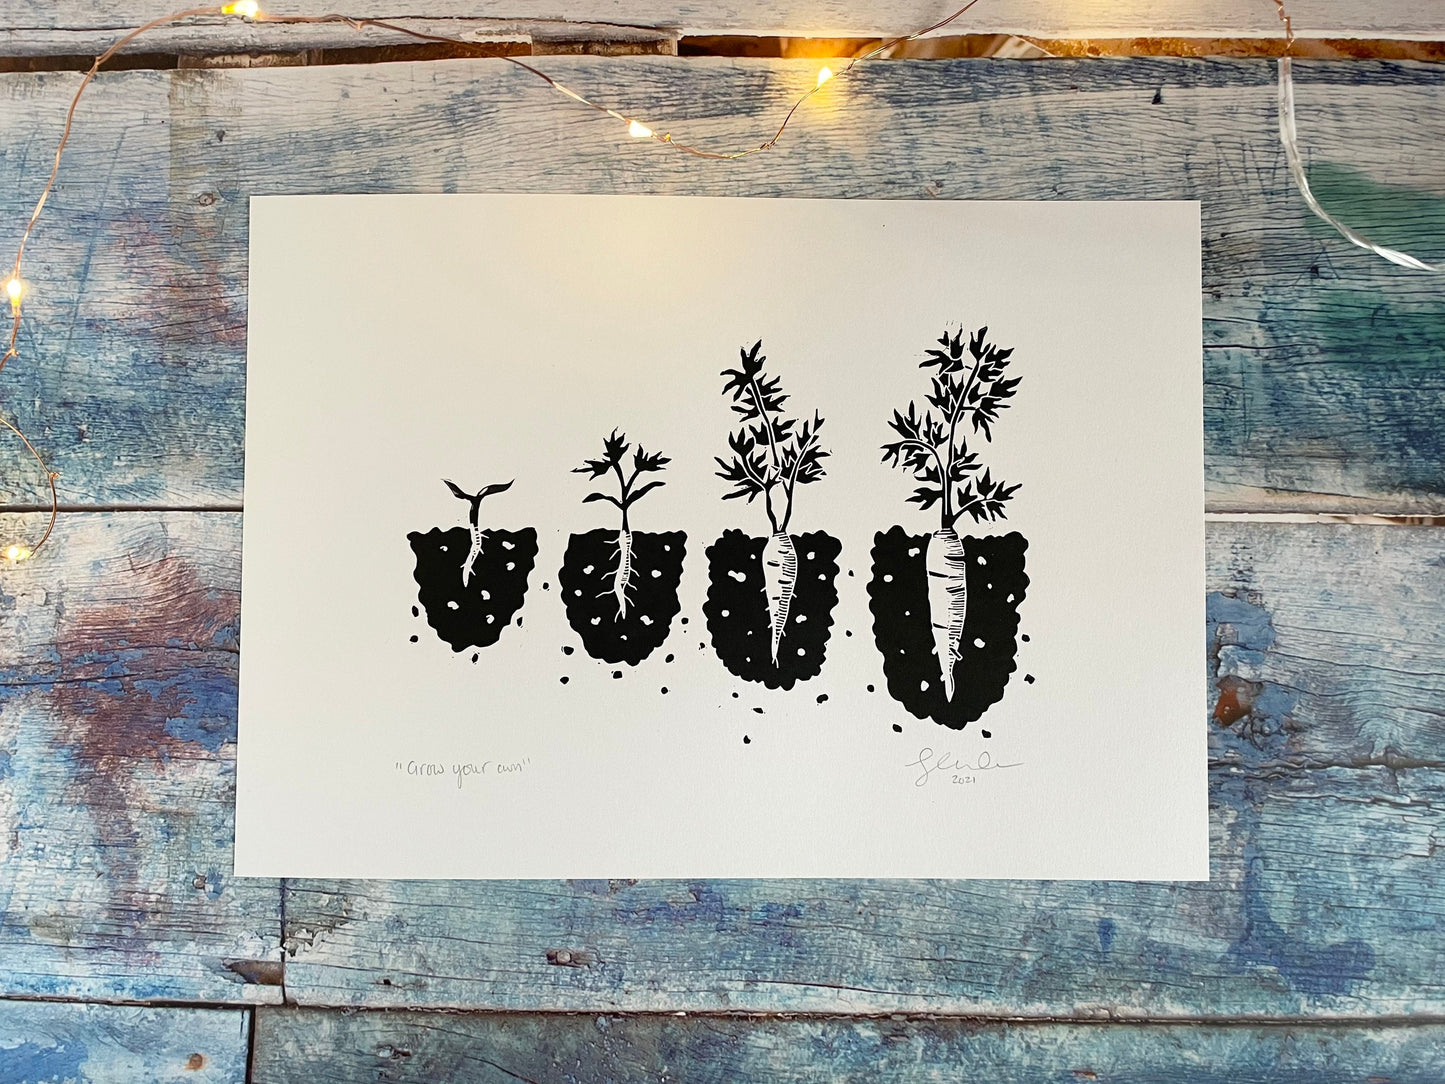 A lino print showing the different stages of a carrot growing from seedling to ready to pick in black